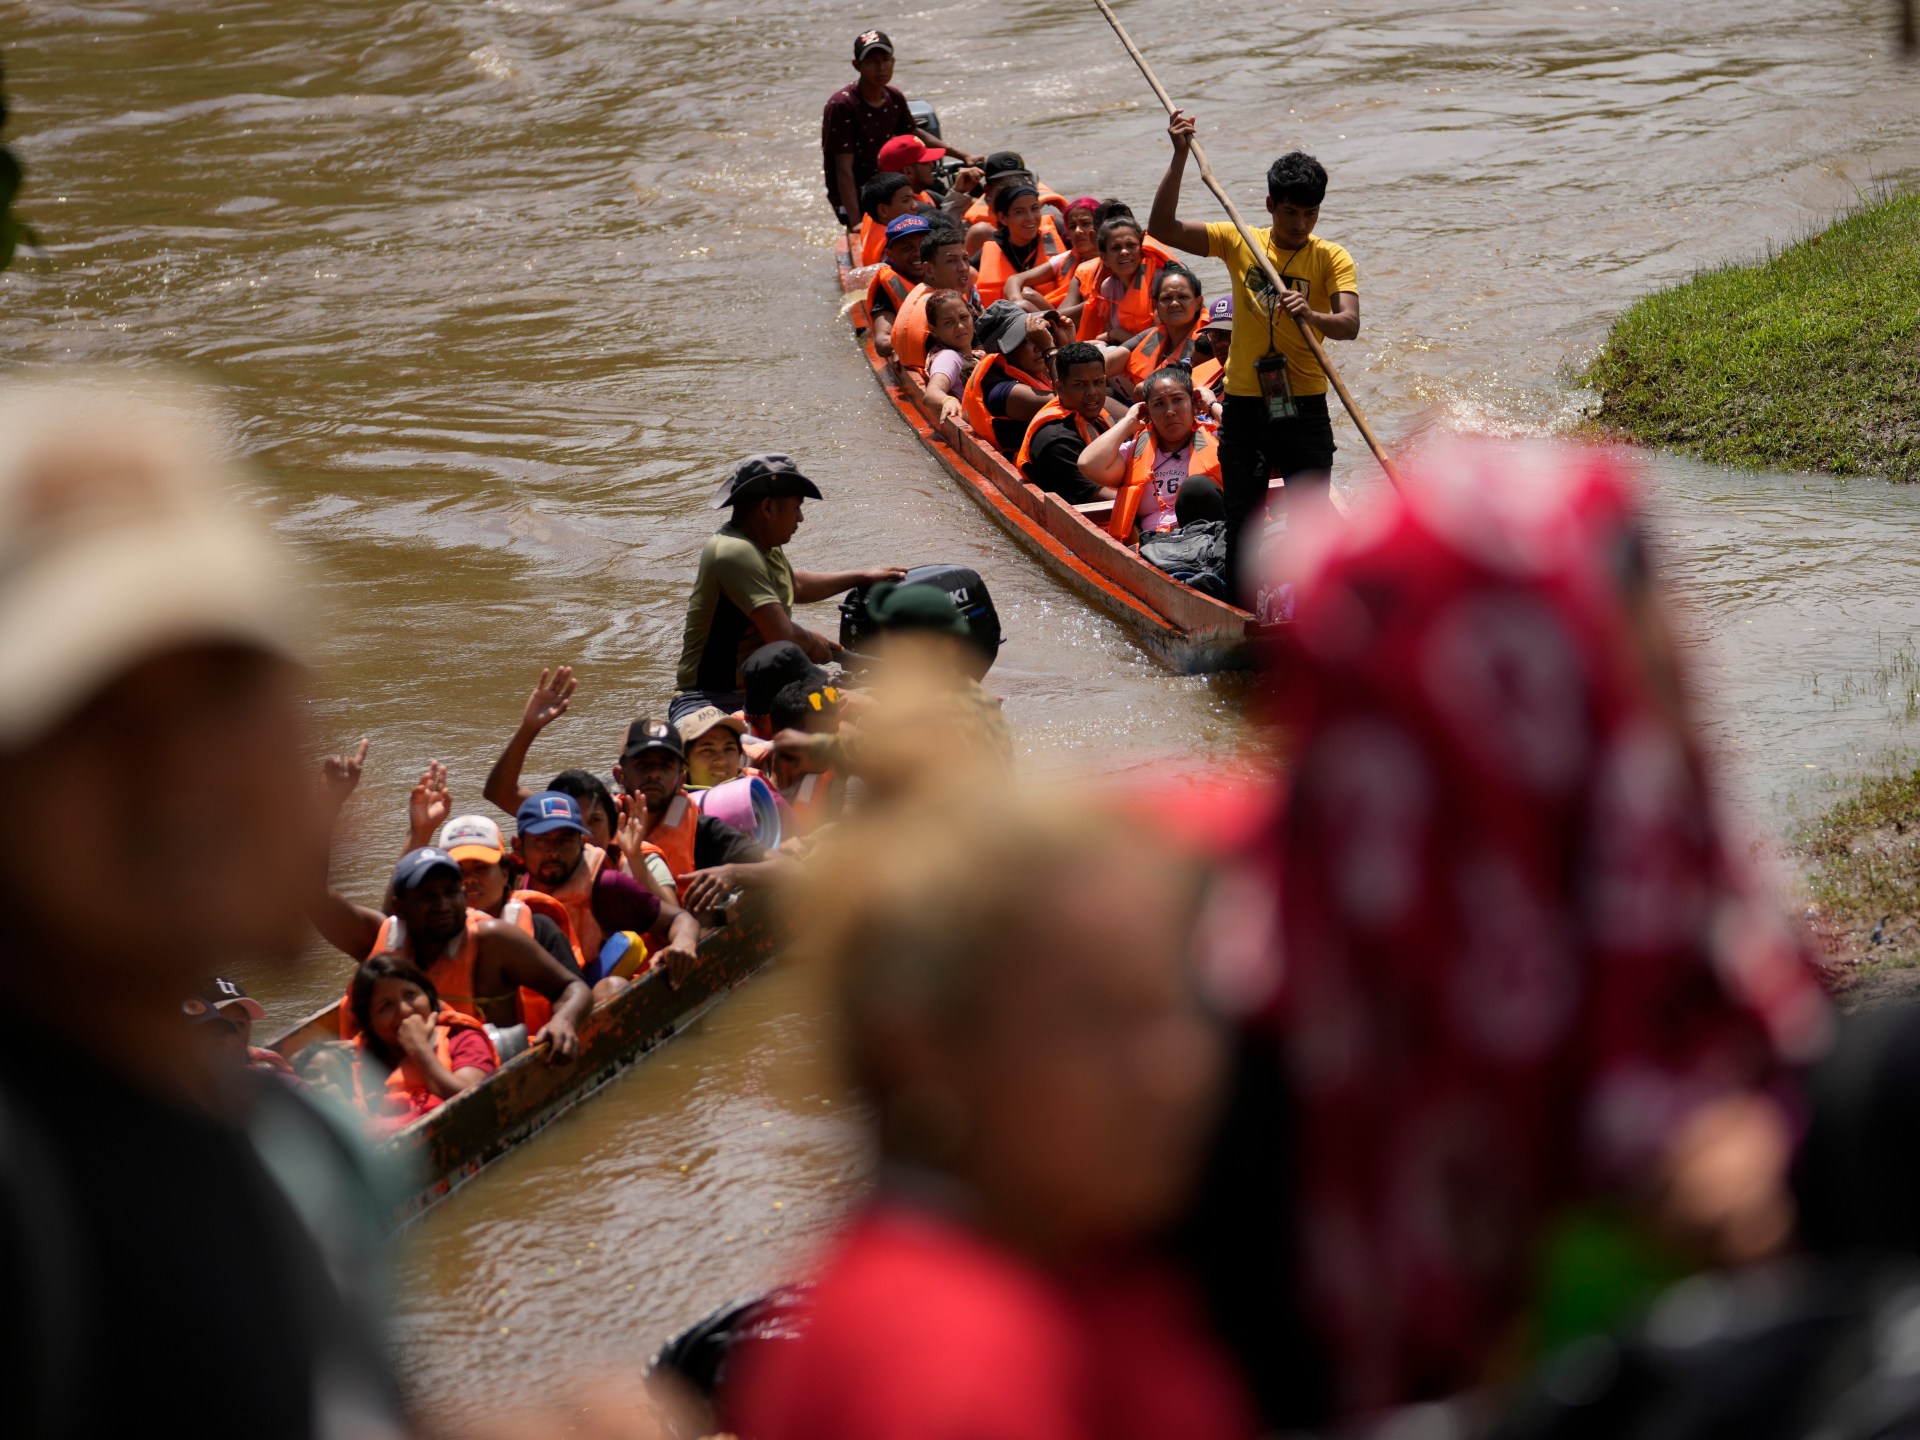 Ten people drown in Panama river as migration risks escalate | Migration News [Video]